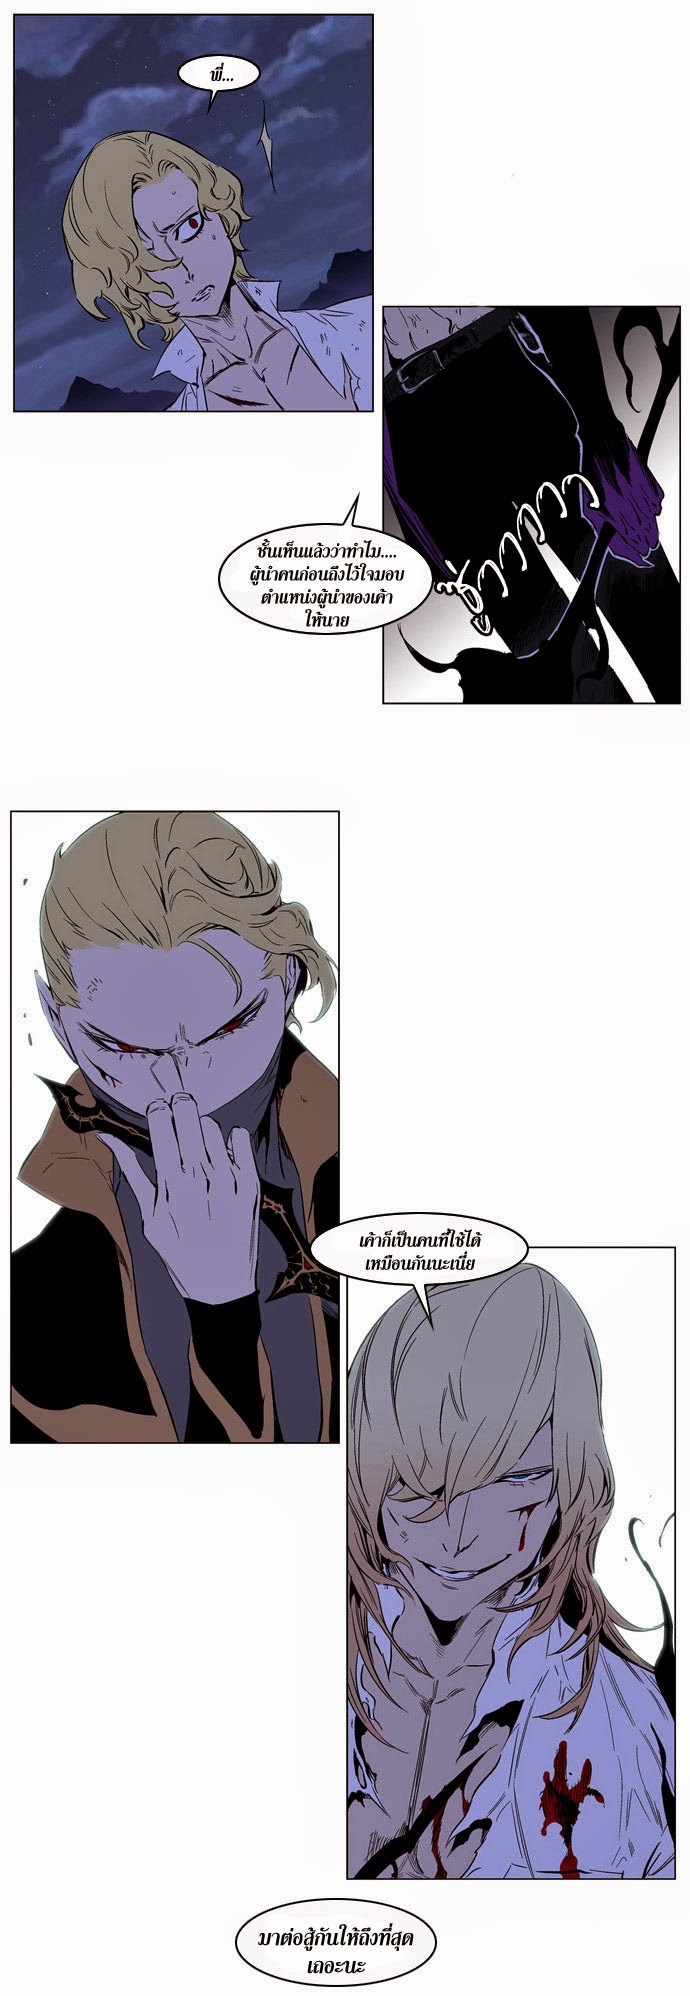 Noblesse 189 022